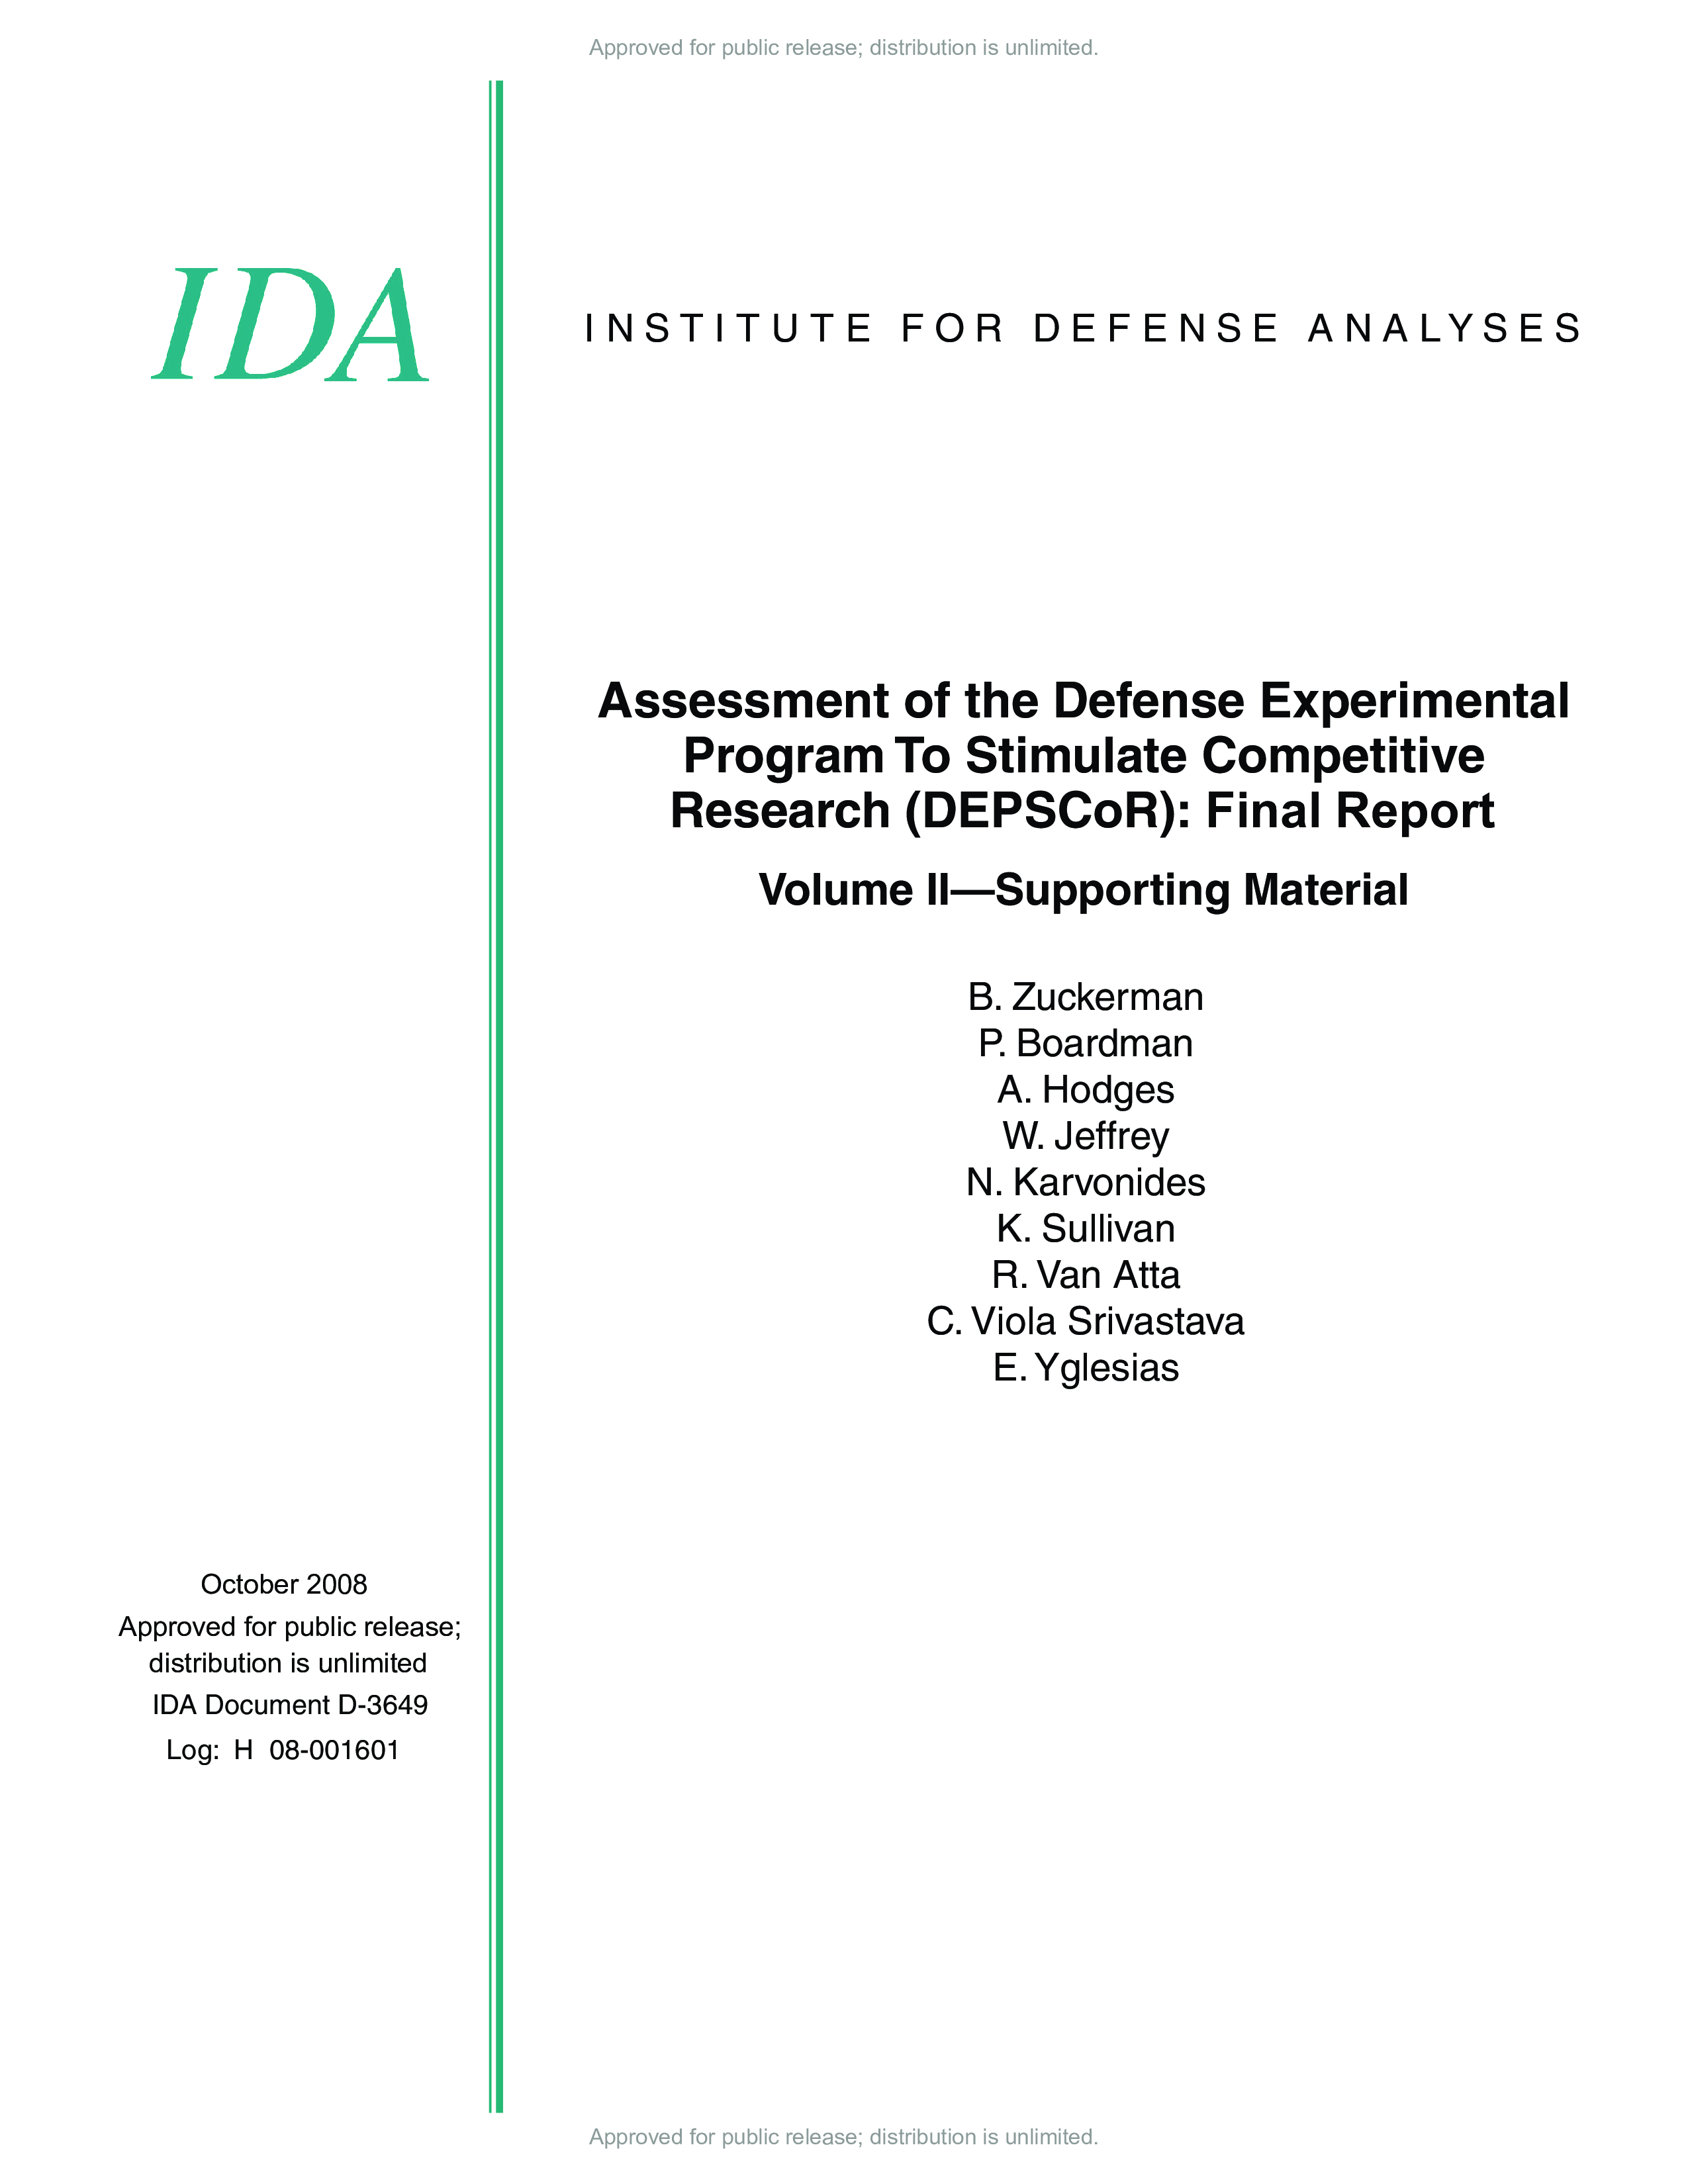 Assessment of the Defense Experimental Program to Stimulate Competitive Research DEPSCoR  Volume 2-Supporting Material